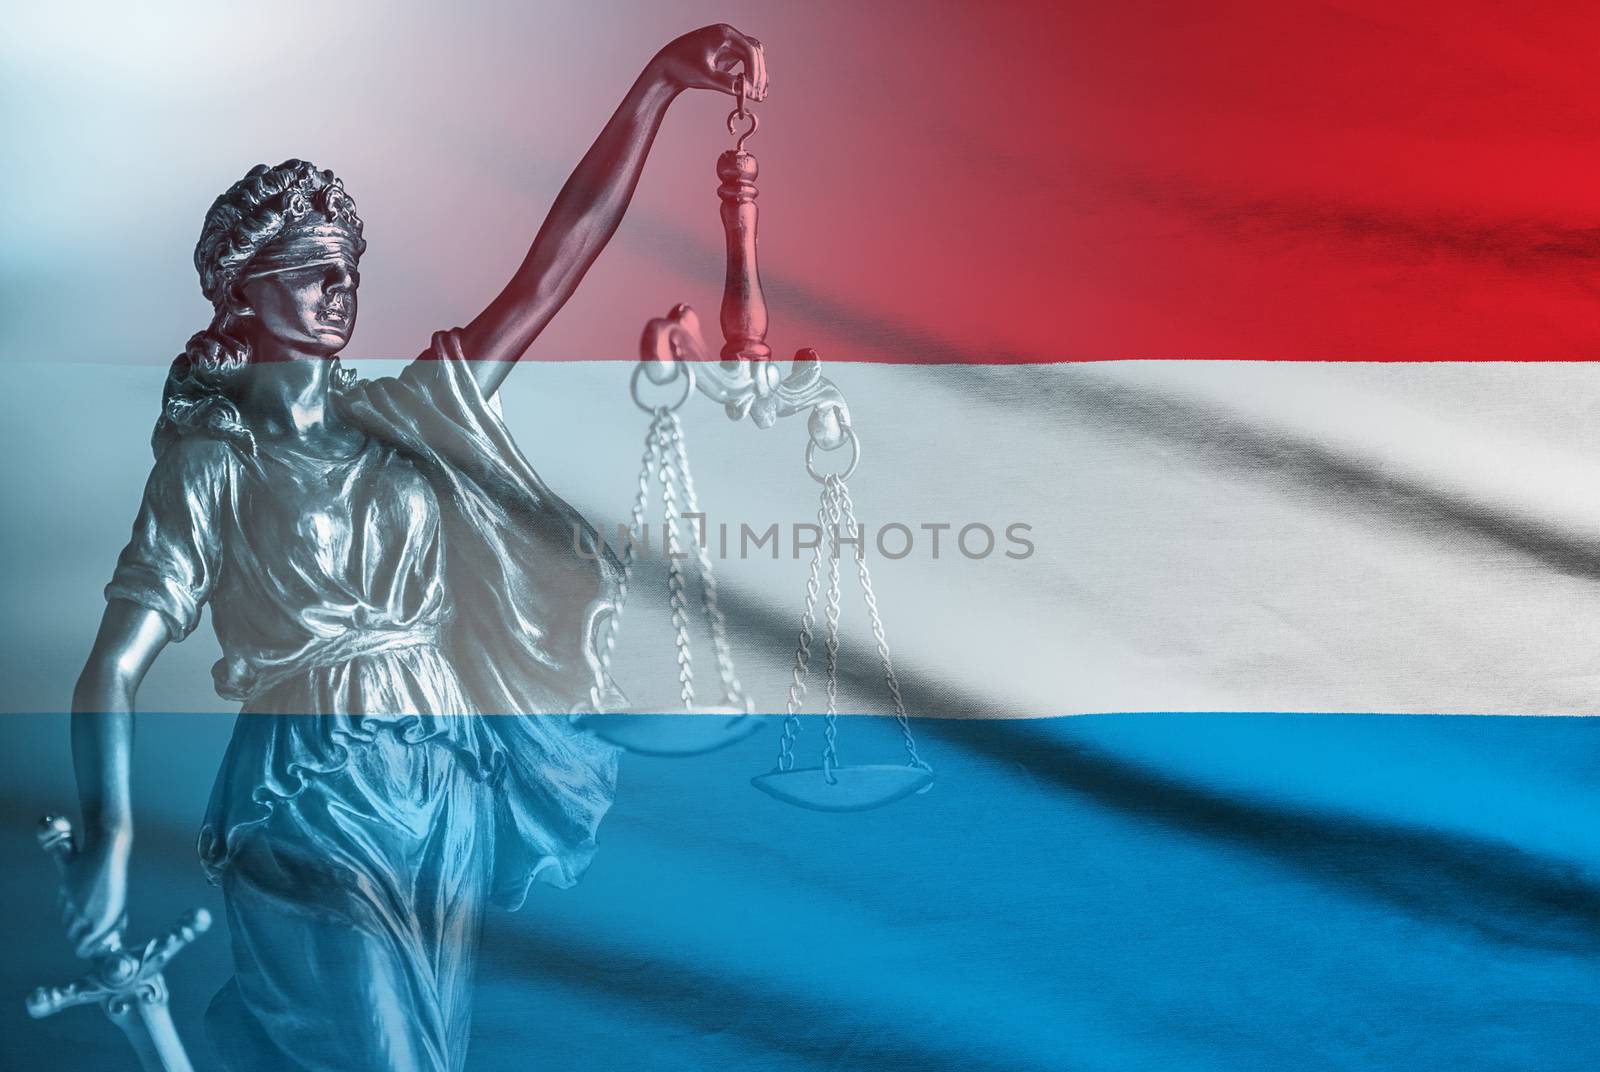 Luxembourg national flag with figure of blindfolded Justice holding scales and sword conceptual of law and impartiality